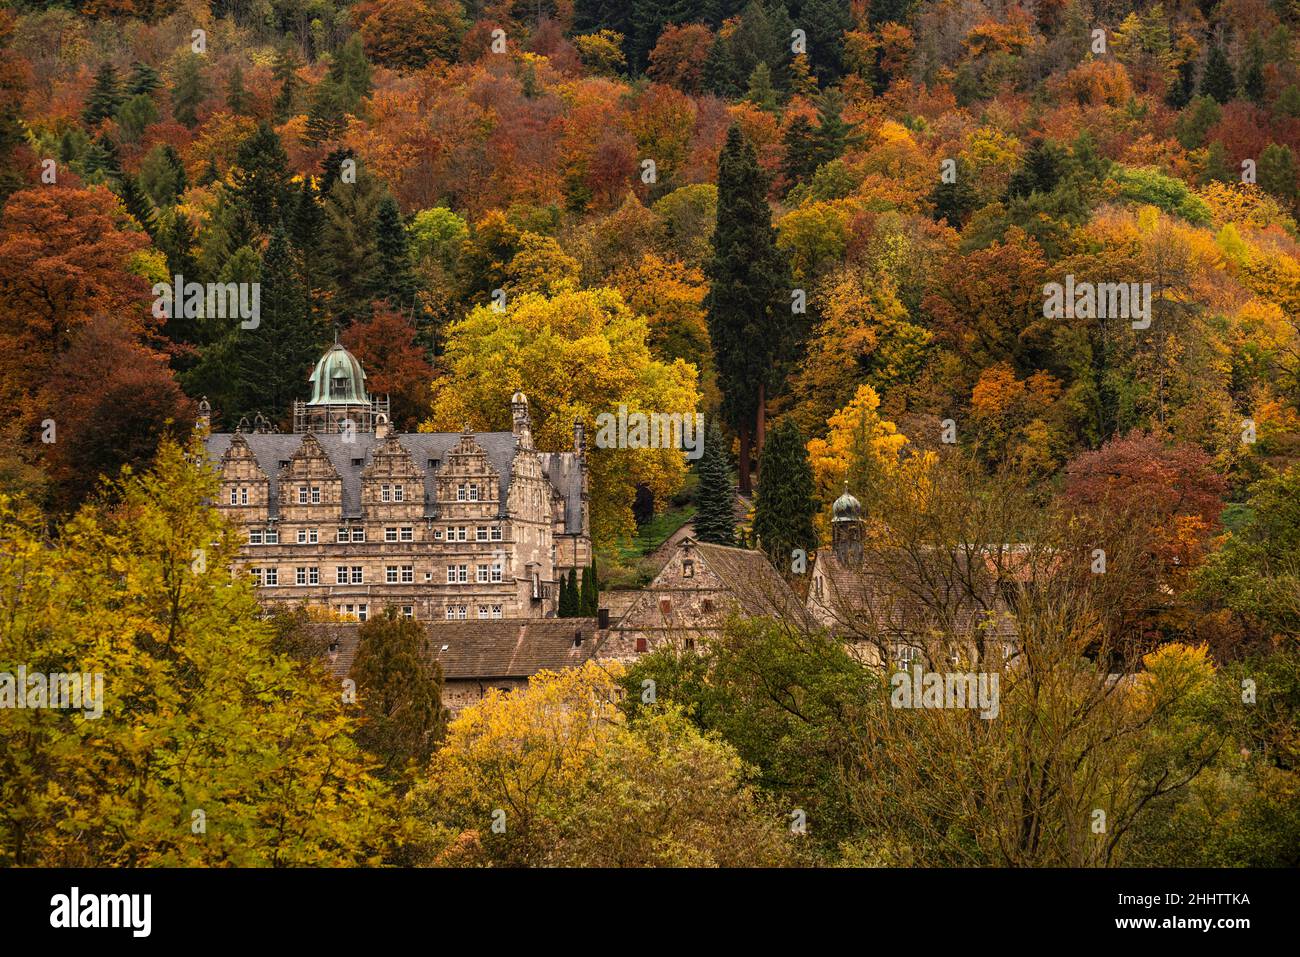 Scenic view of the picturesque Hämelschenburg Castle from the Weser Renaissance period, surrounded by colorful autumn forest, Weser Uplands, Germany Stock Photo